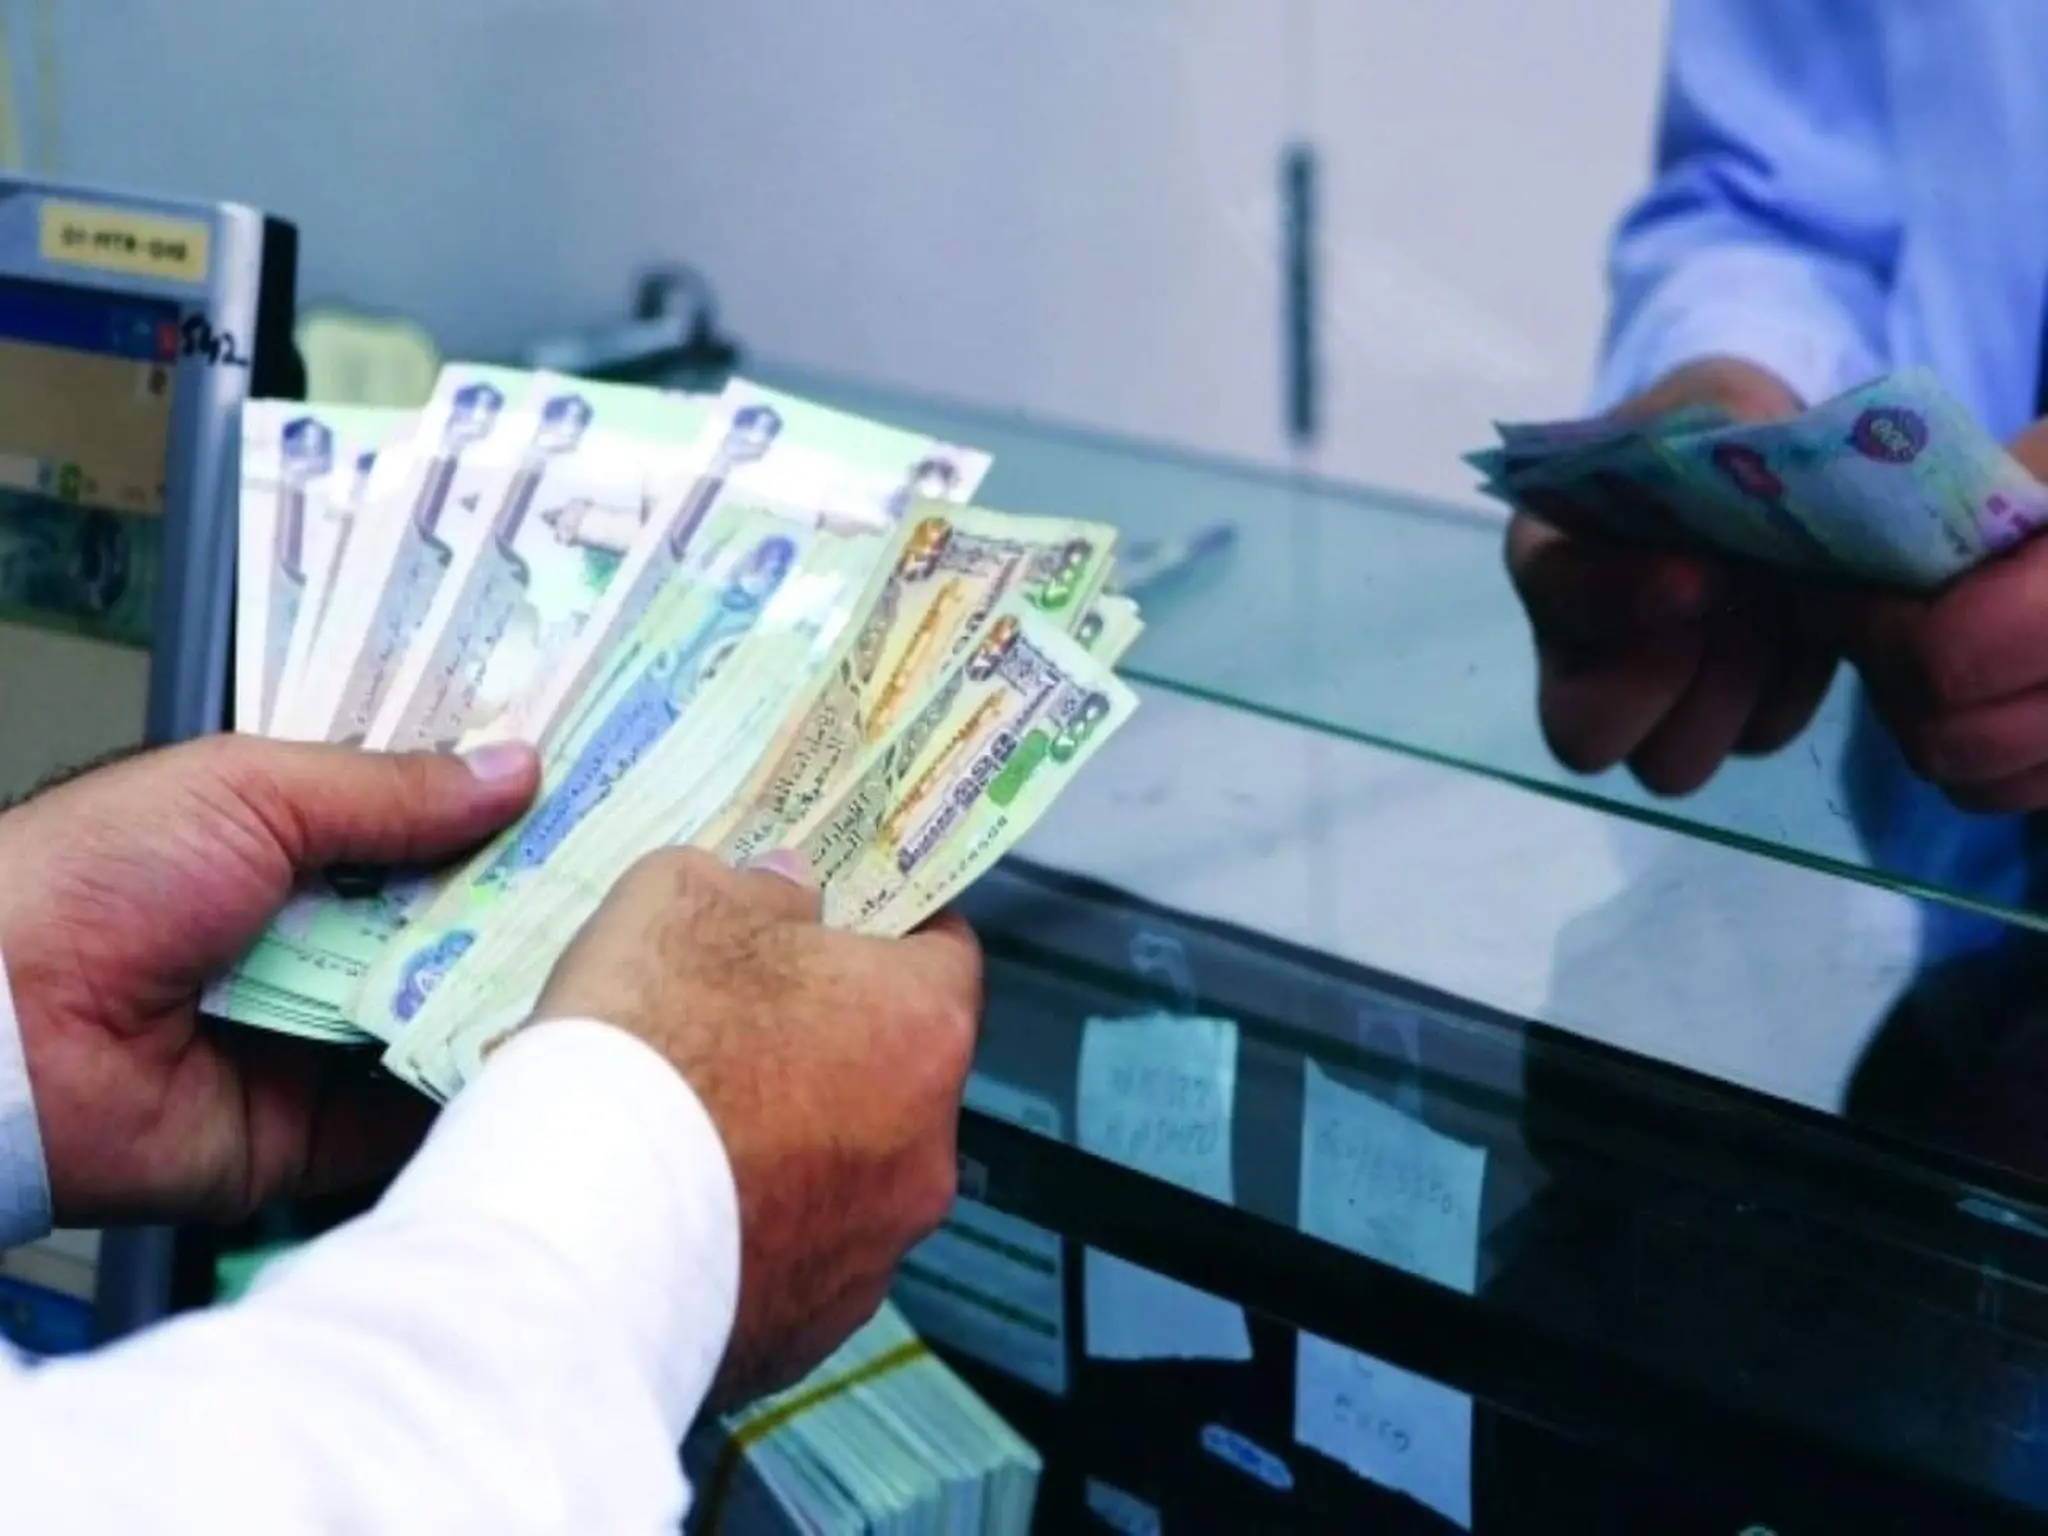 30 thousand dirhams in compensation to a worker in Abu Dhabi due to his exposure to abuse